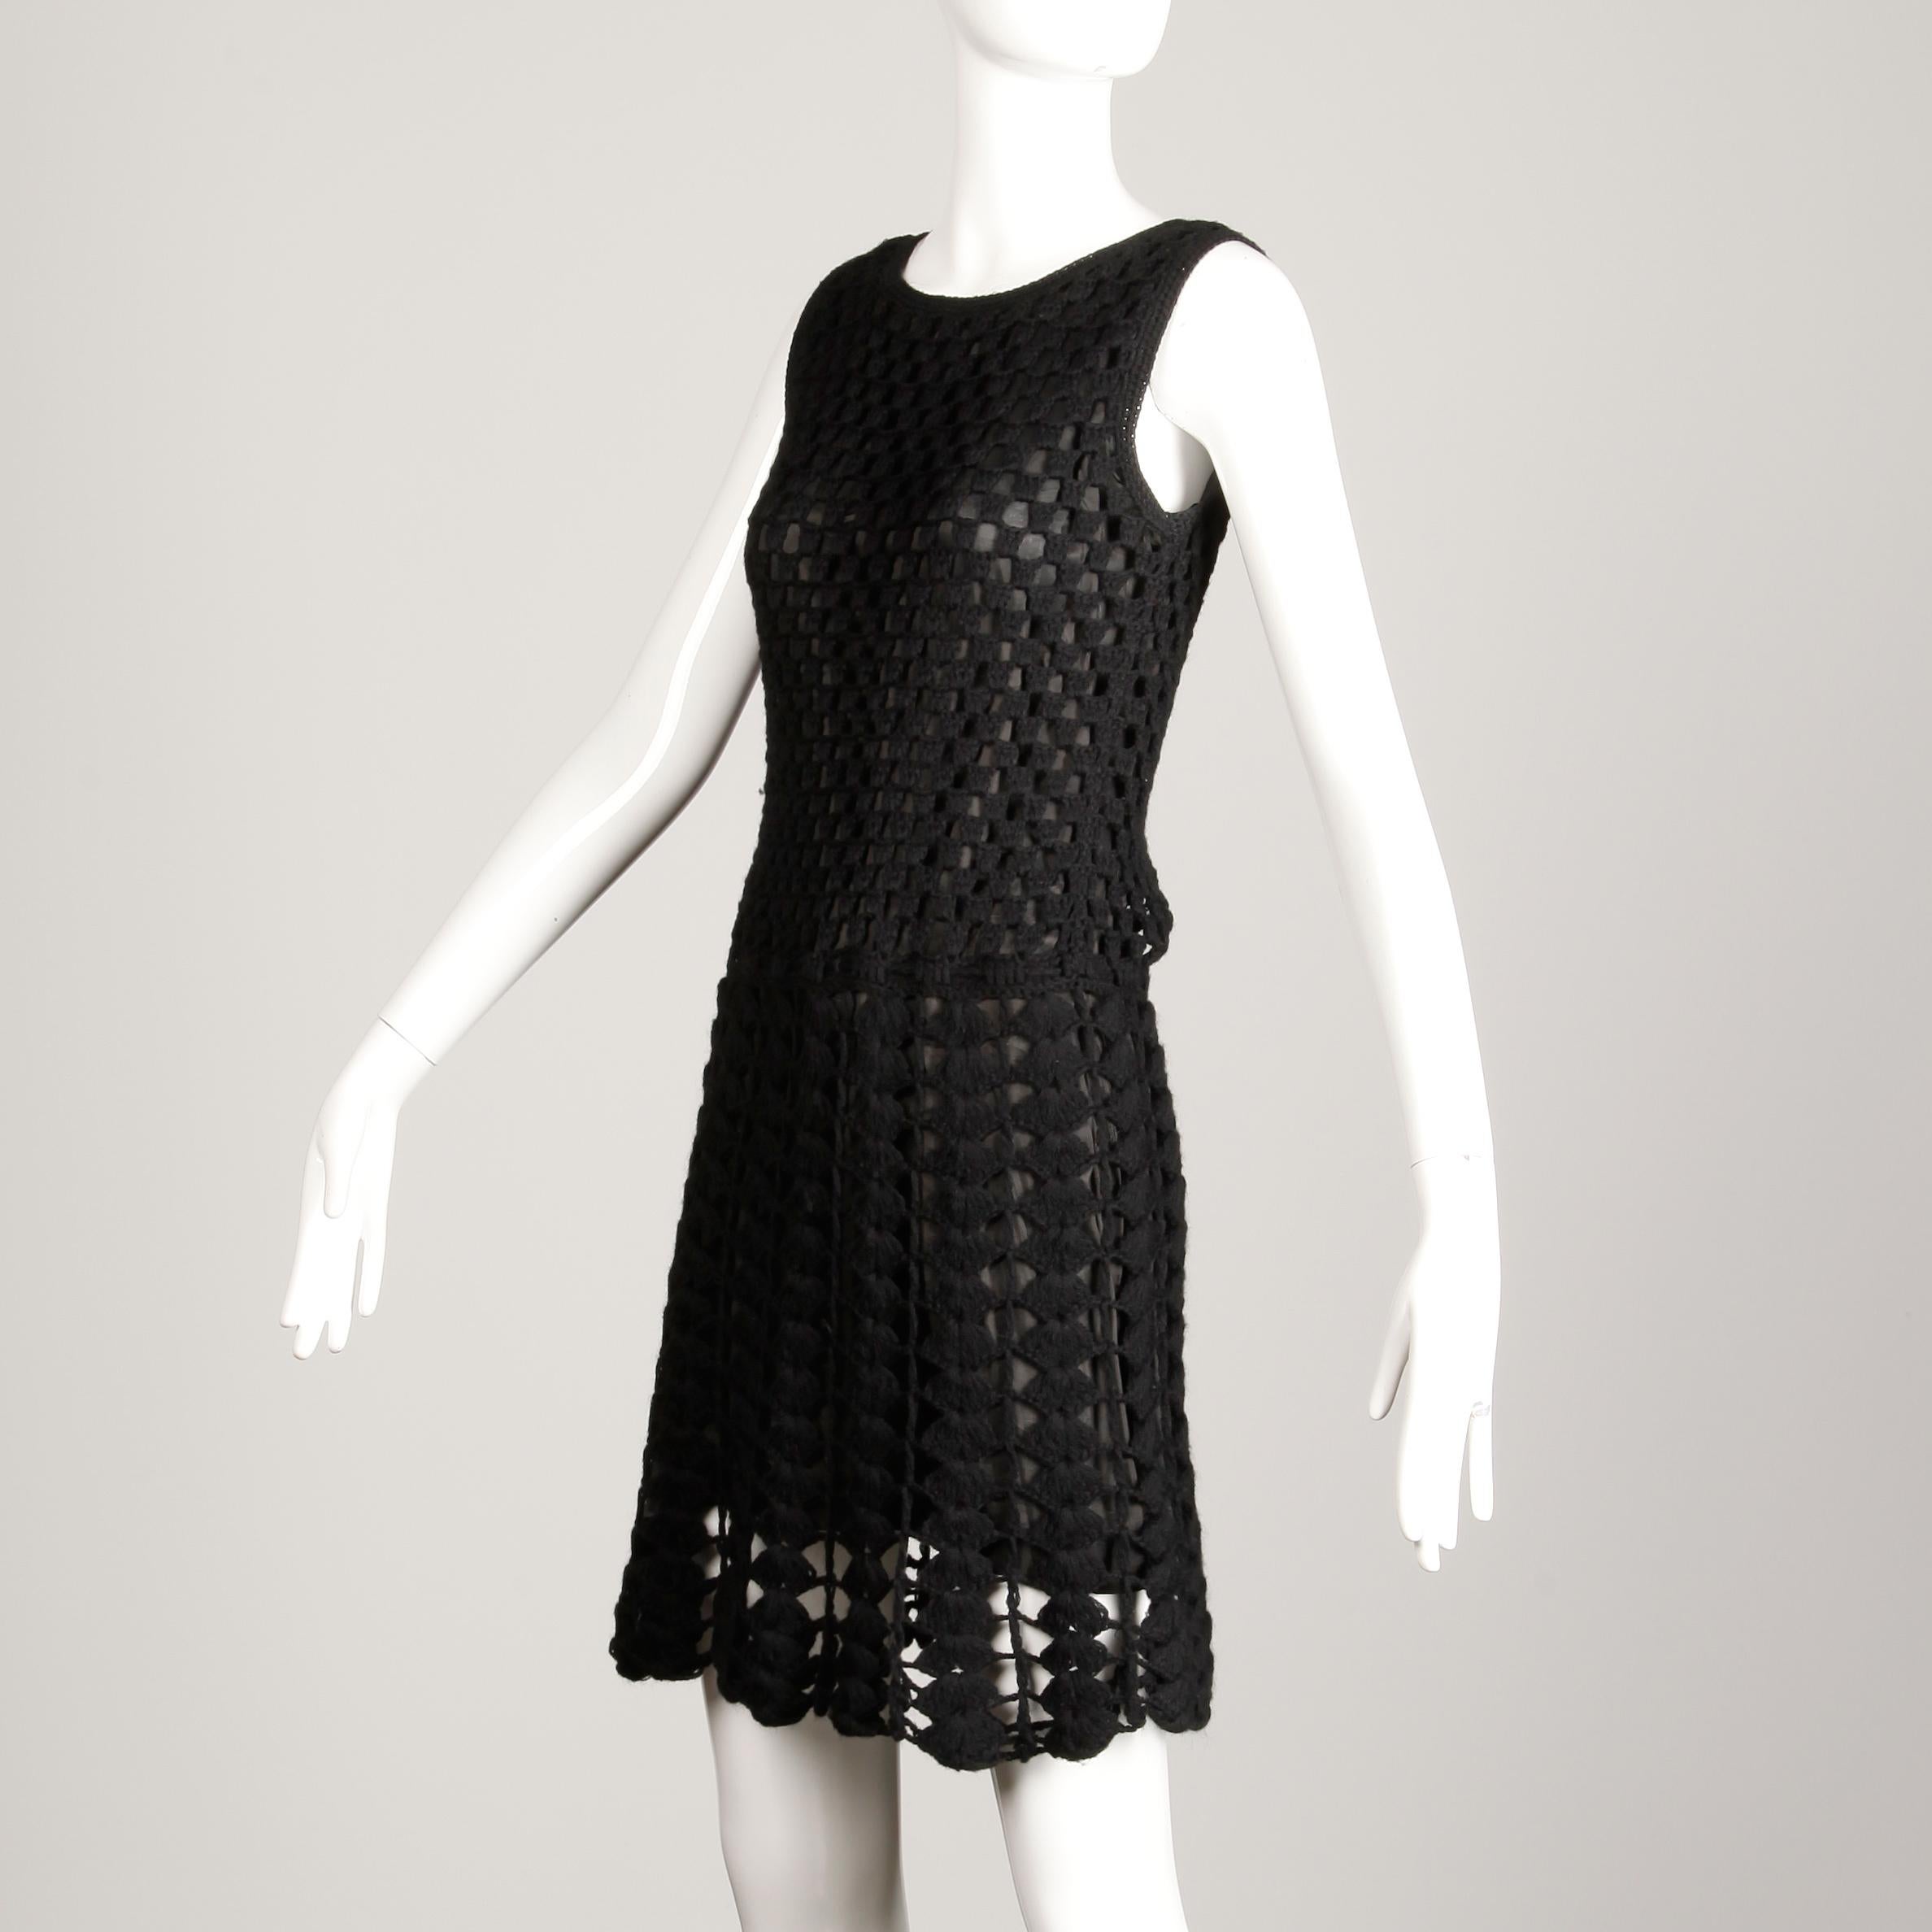 Vintage 1960s vintage black hand crochet dress with lining. Fully lined with no closure (pulls on over the head) tie belt at waist woven into the fabric may be removed if desired. The marked size is small, but the dress will also likely fit a modern